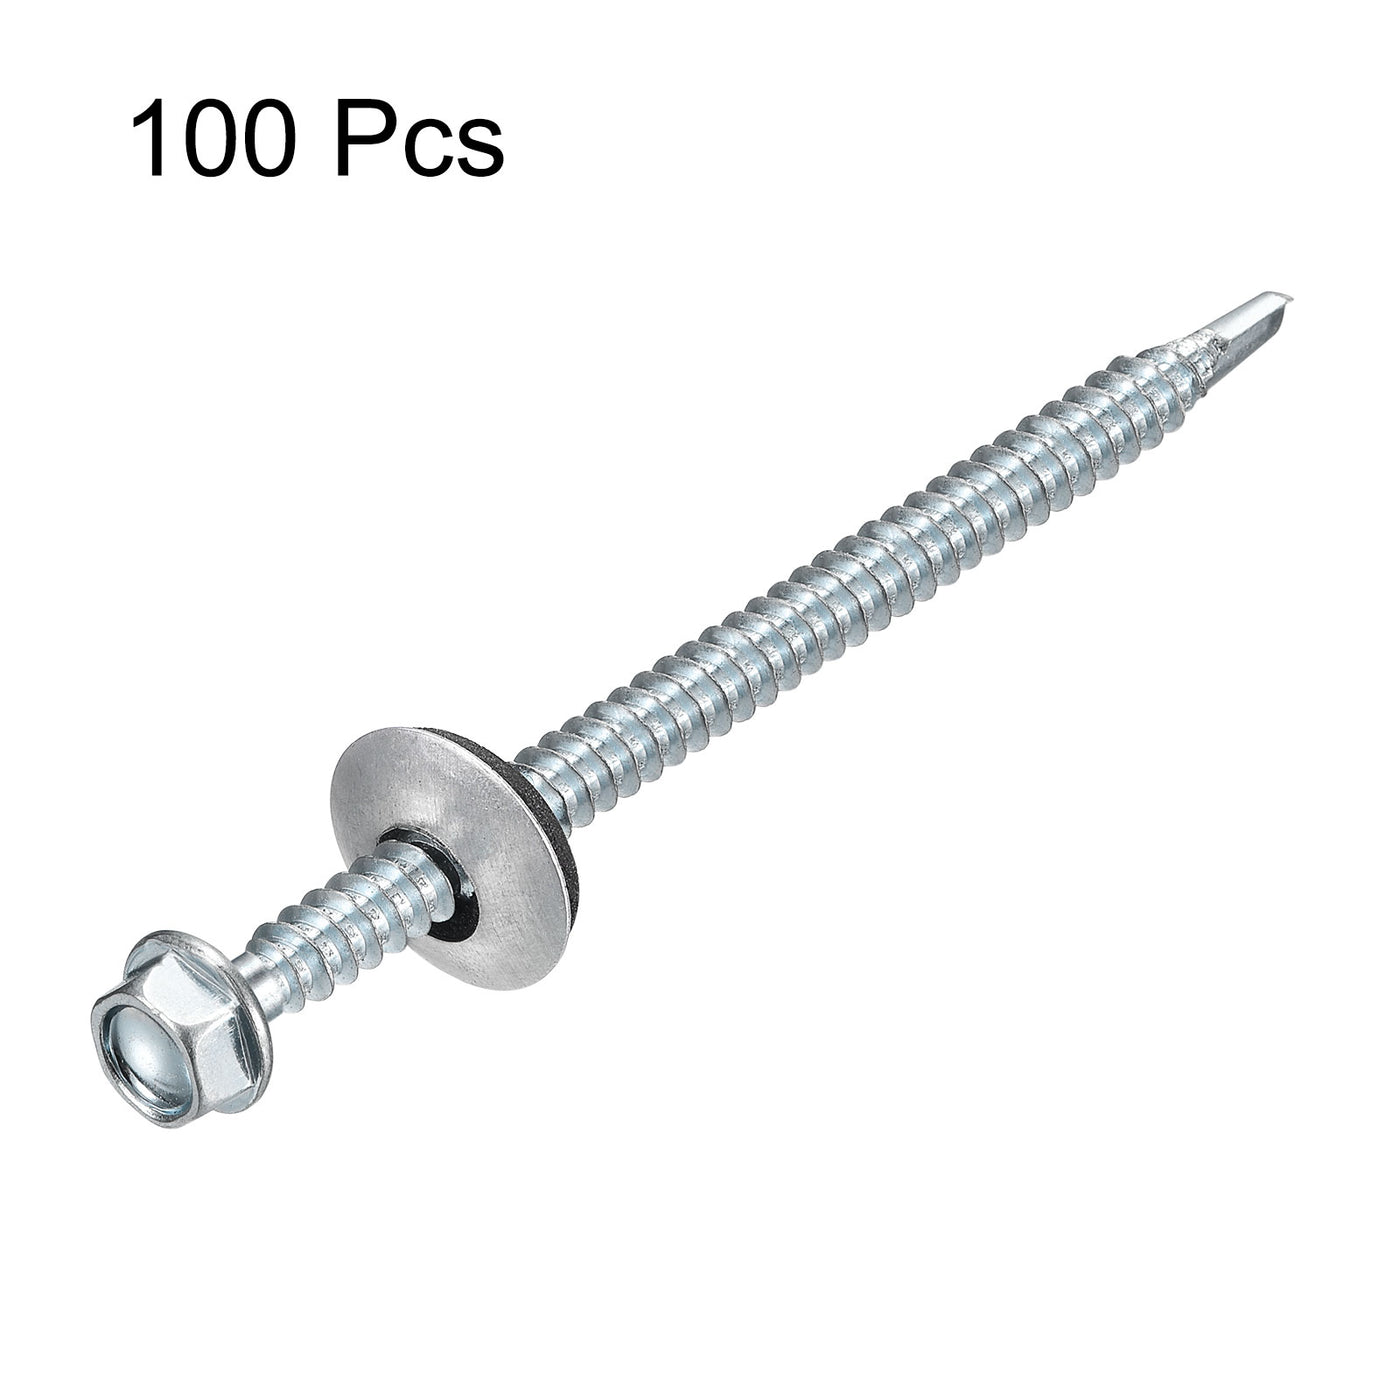 uxcell Uxcell #12 x 3-9/16" Self Drilling Screws, 100pcs Roofing Screws with EPDM Washer